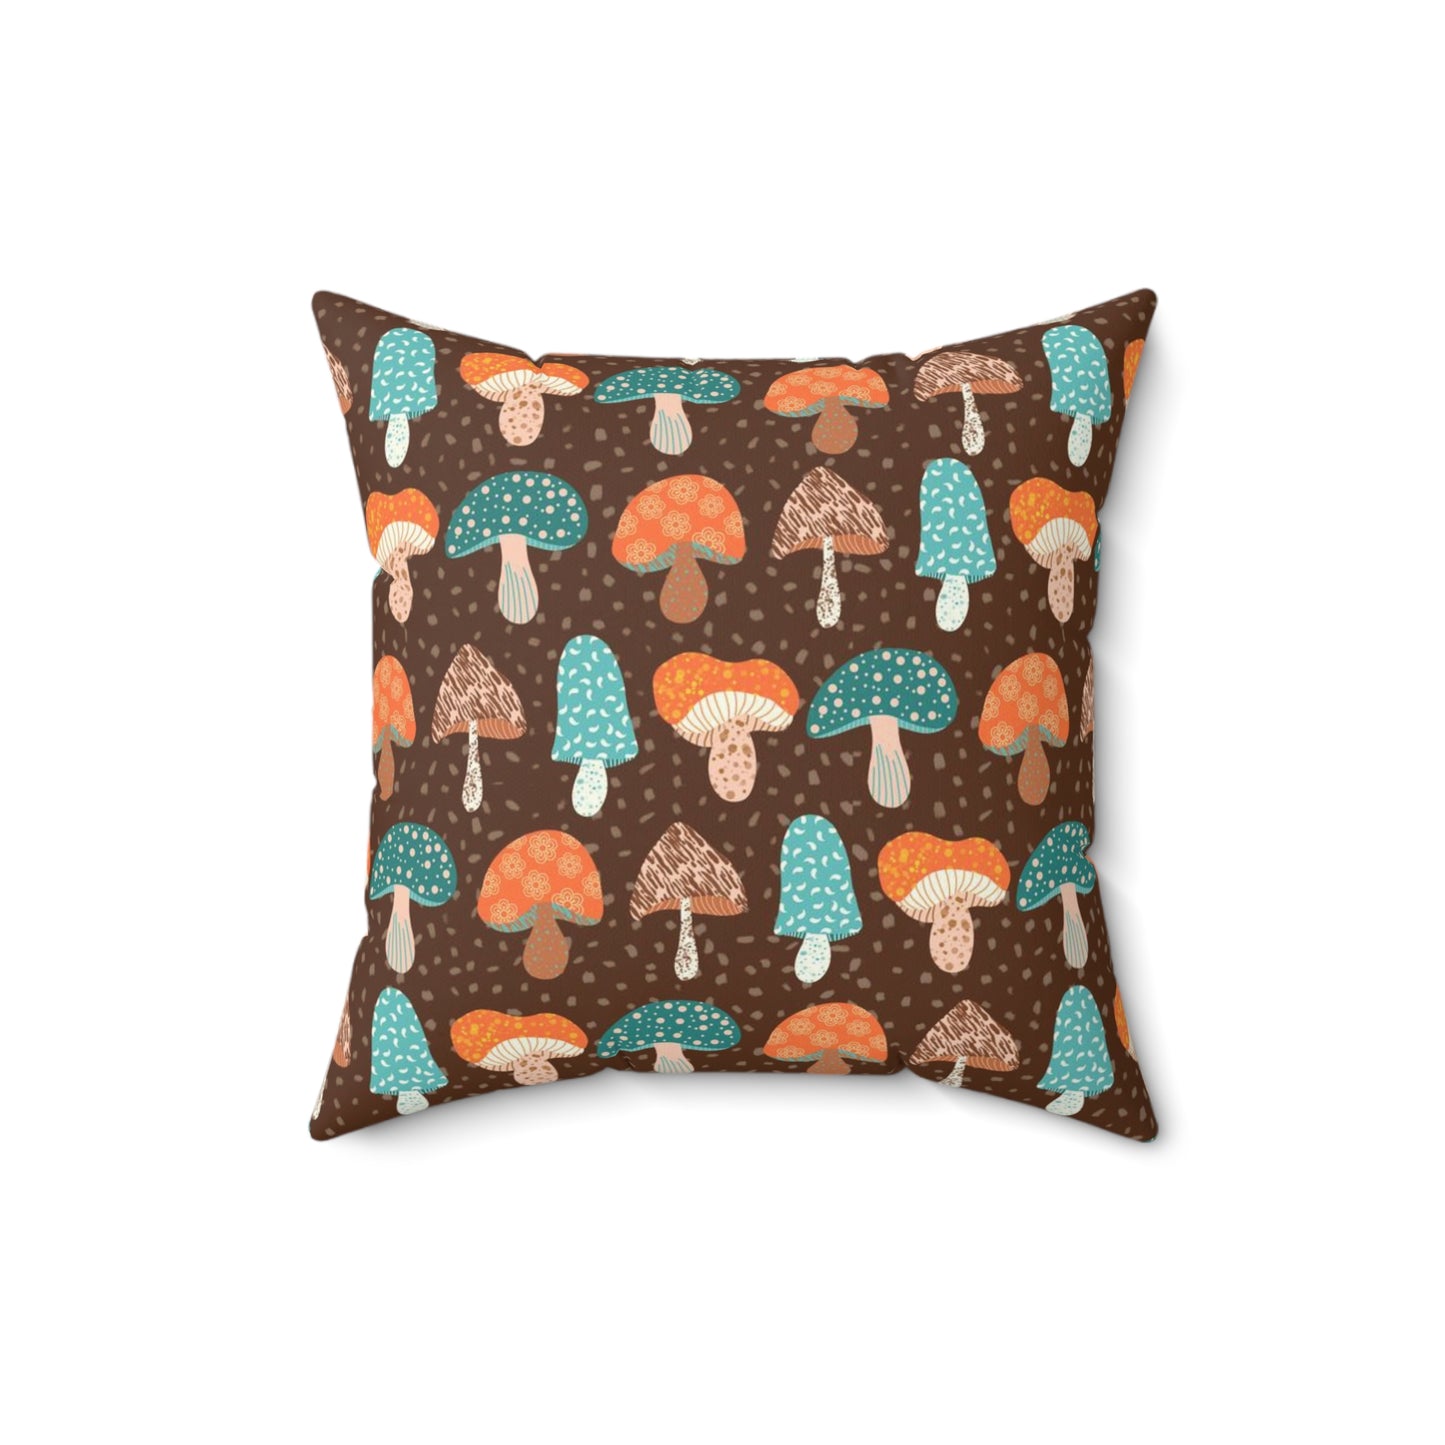 Magical Mishrooms Spun Polyester Square Pillow